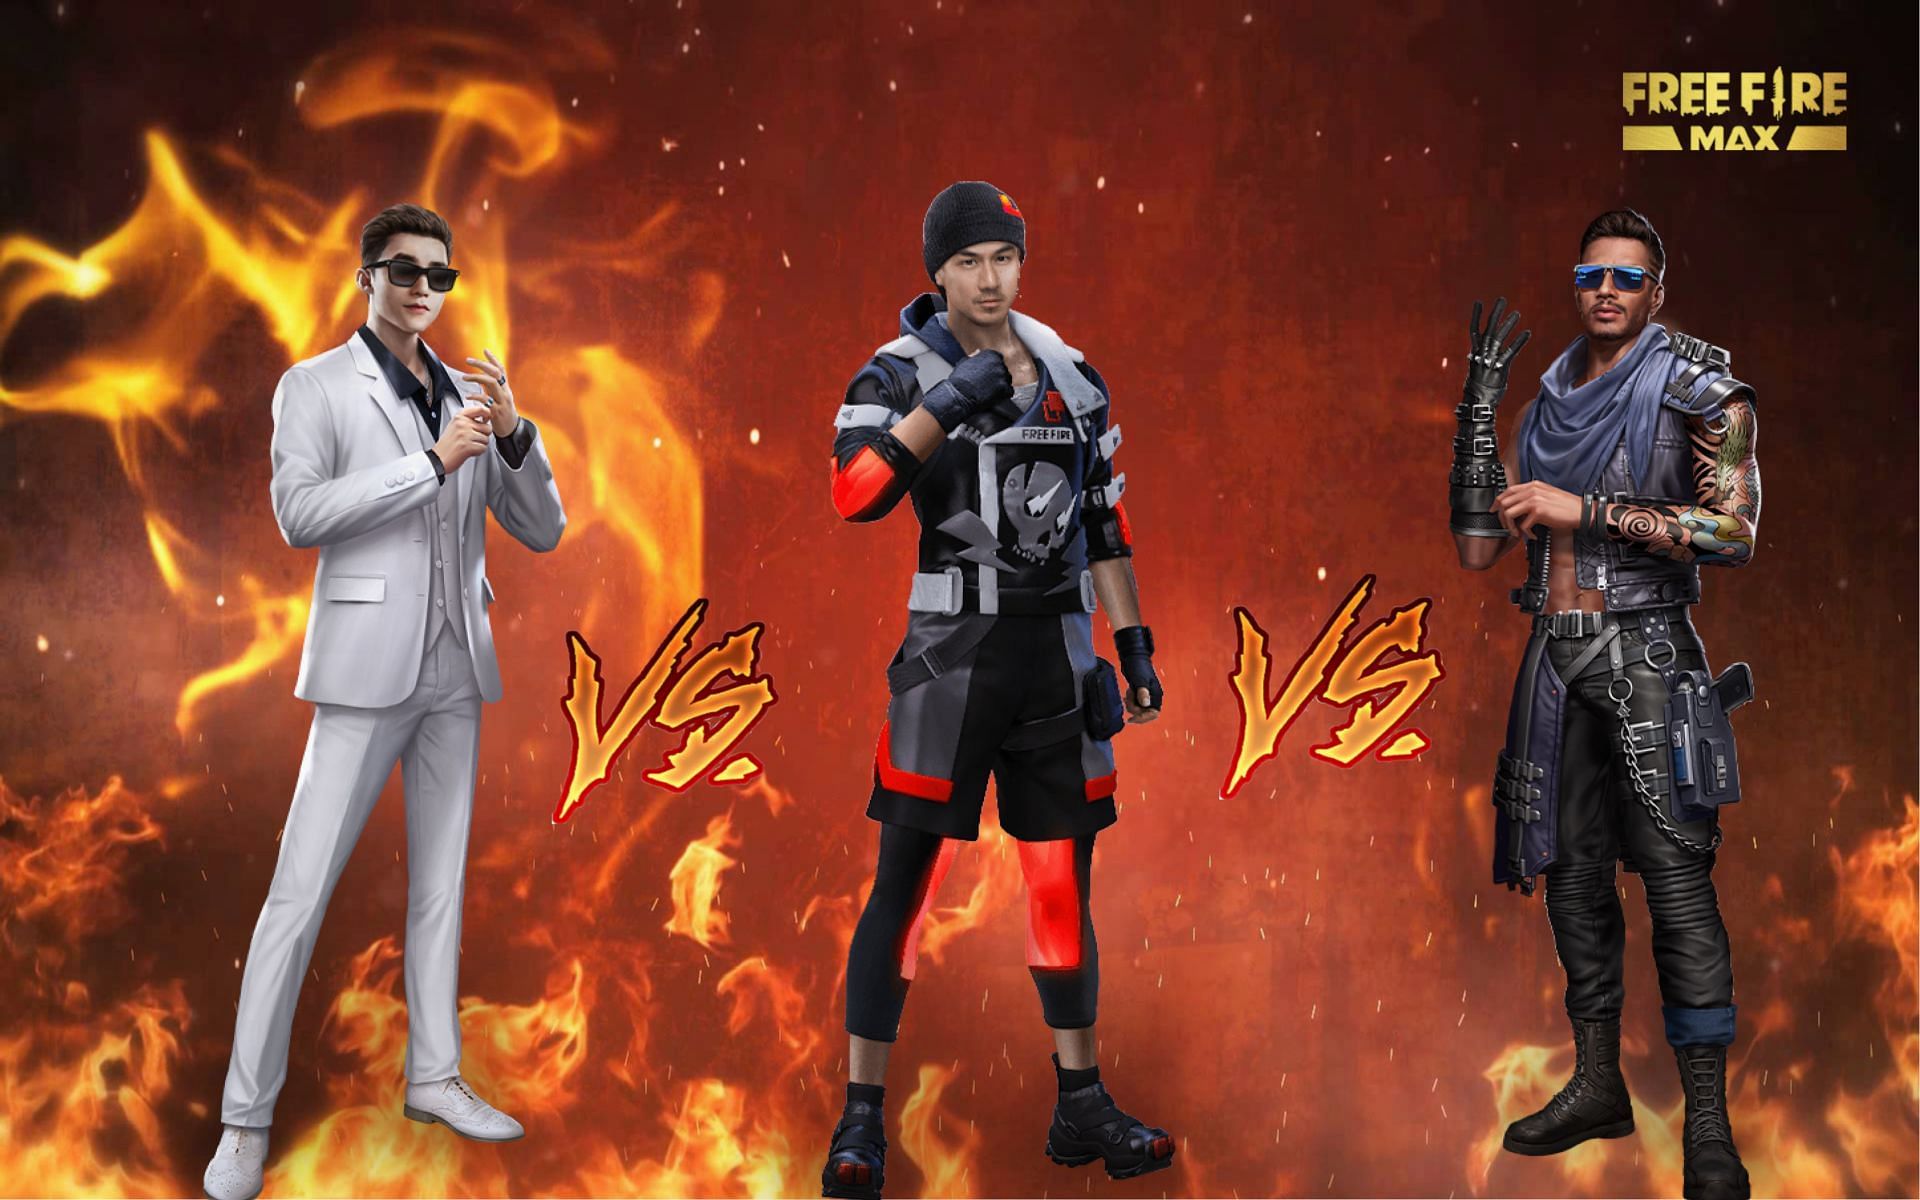 Rank push becomes easier when using these Free Fire MAX characters (Image via Sportskeeda)